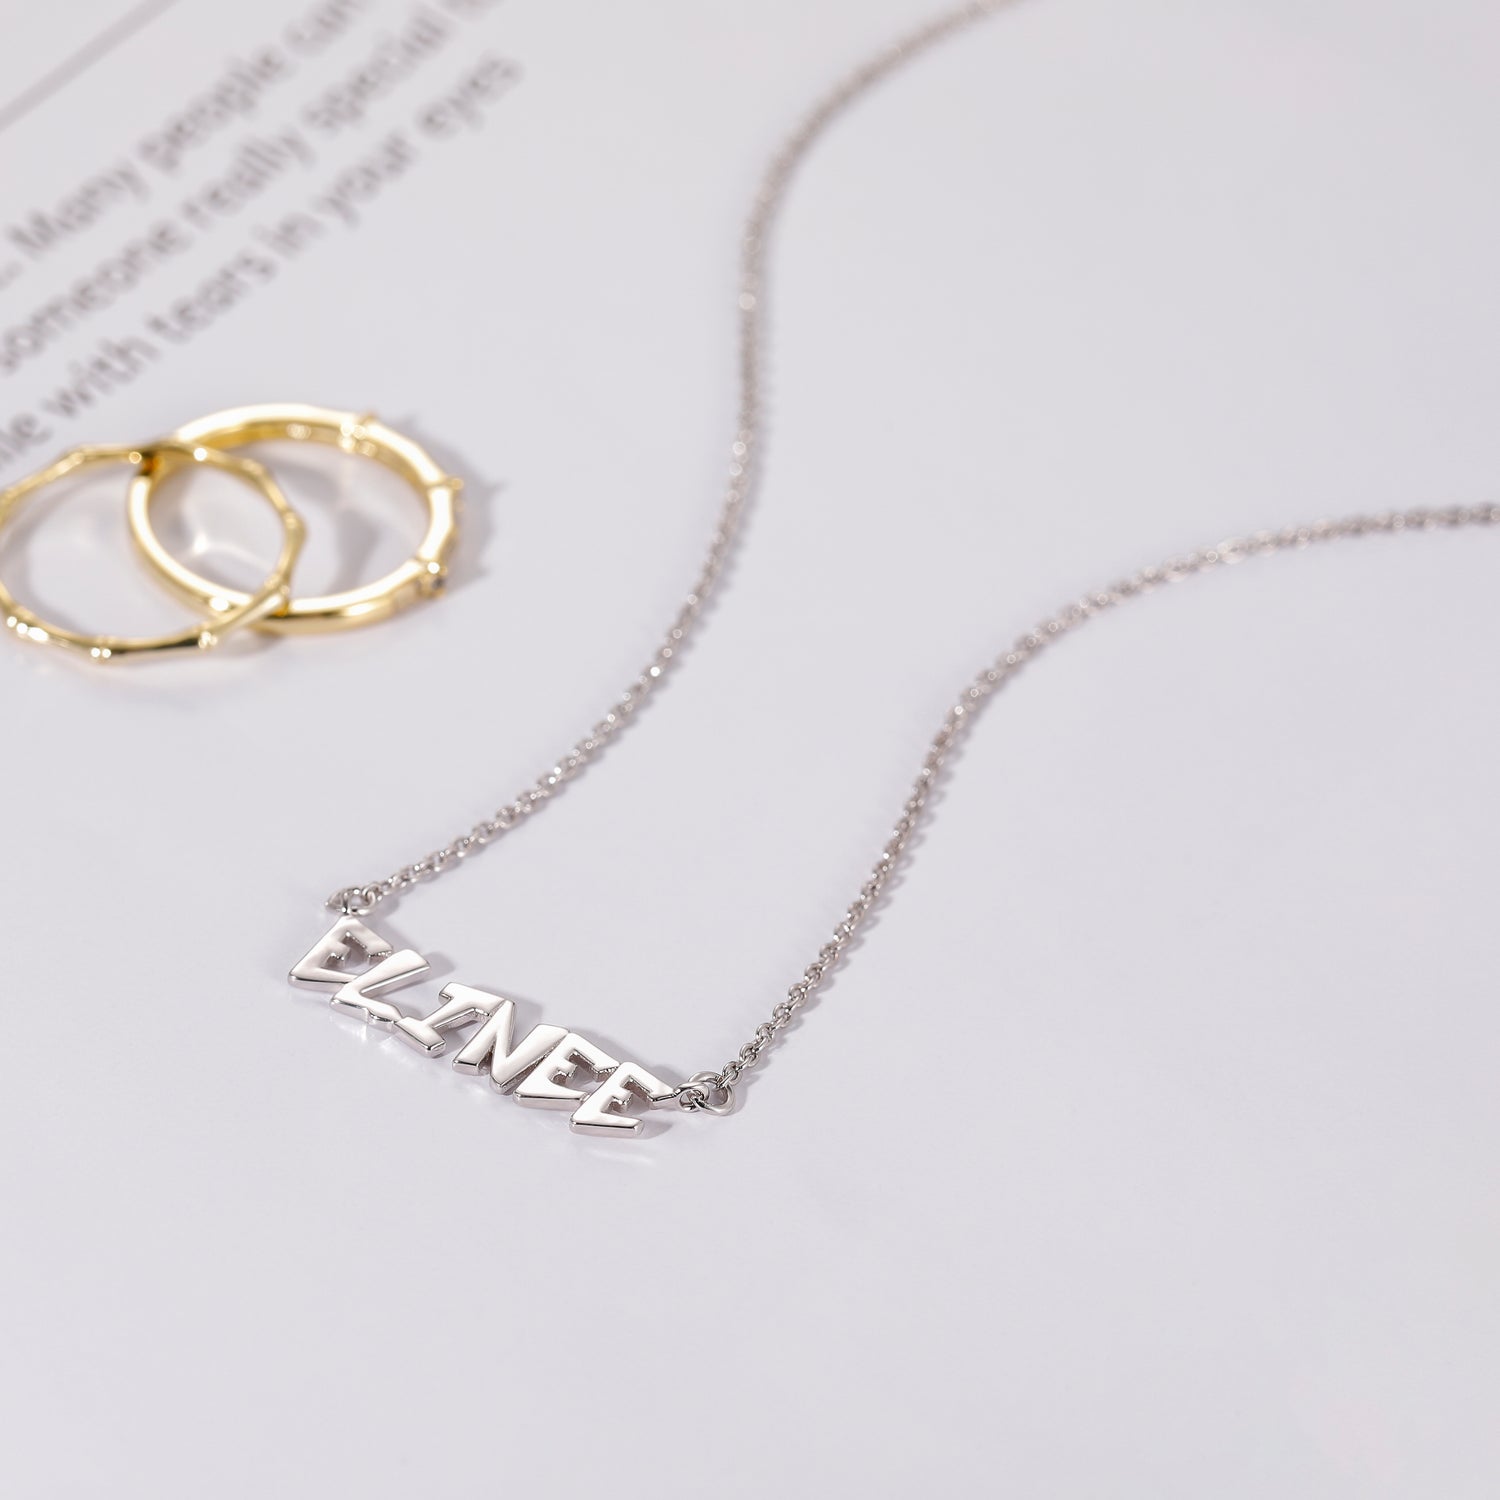 white gold necklace, solid gold name necklace, white gold name necklace